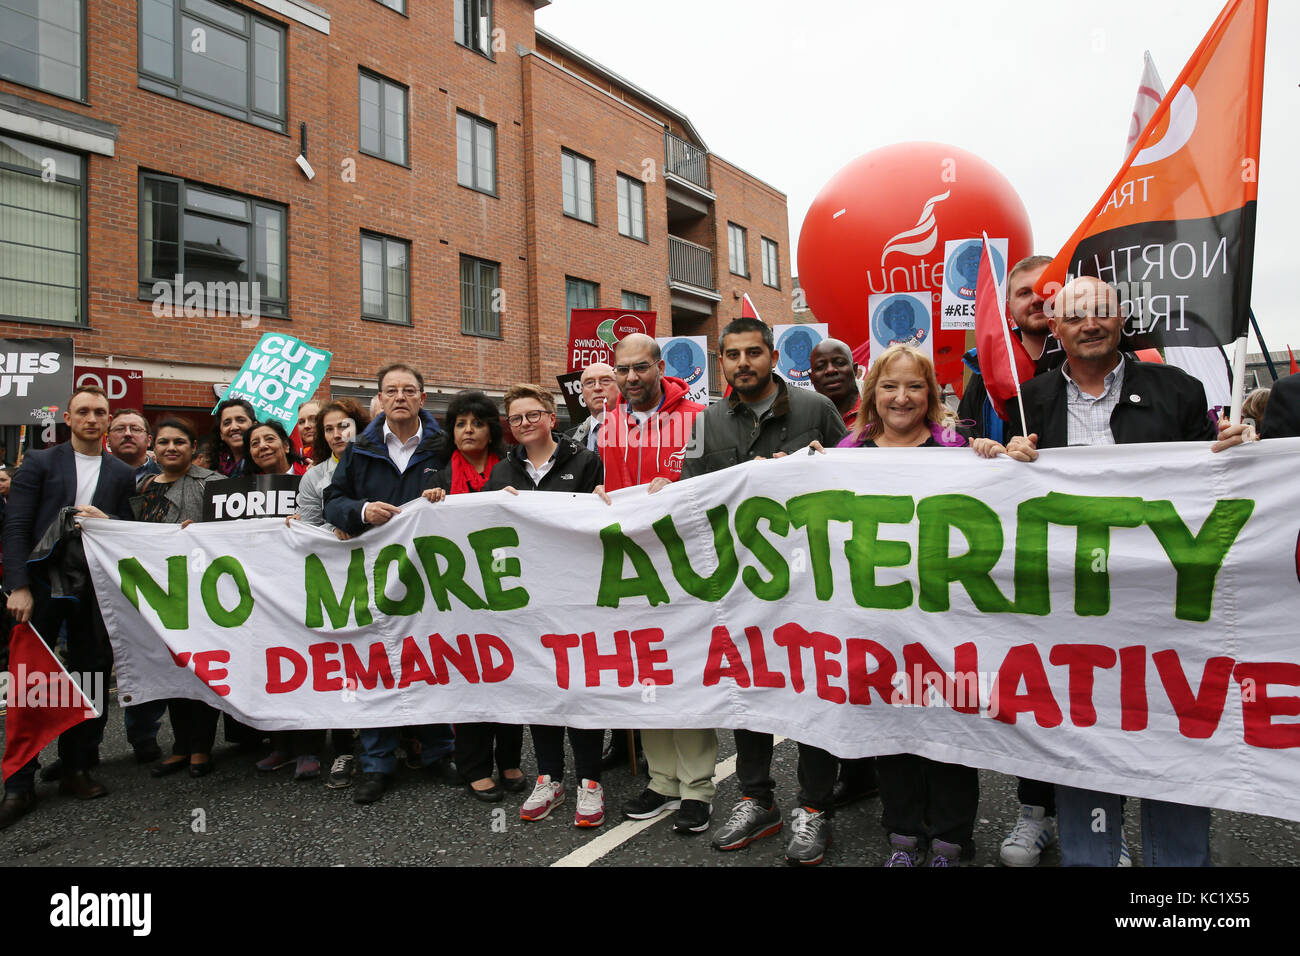 Manchester, UK. 1st October, 2017. 'No more Austerity We demand the Alternative' banner at the front of the anti austerity protest in Manchester,1st October, 2017 (C)Barbara Cook/Alamy Live News Credit: Barbara Cook/Alamy Live News Stock Photo